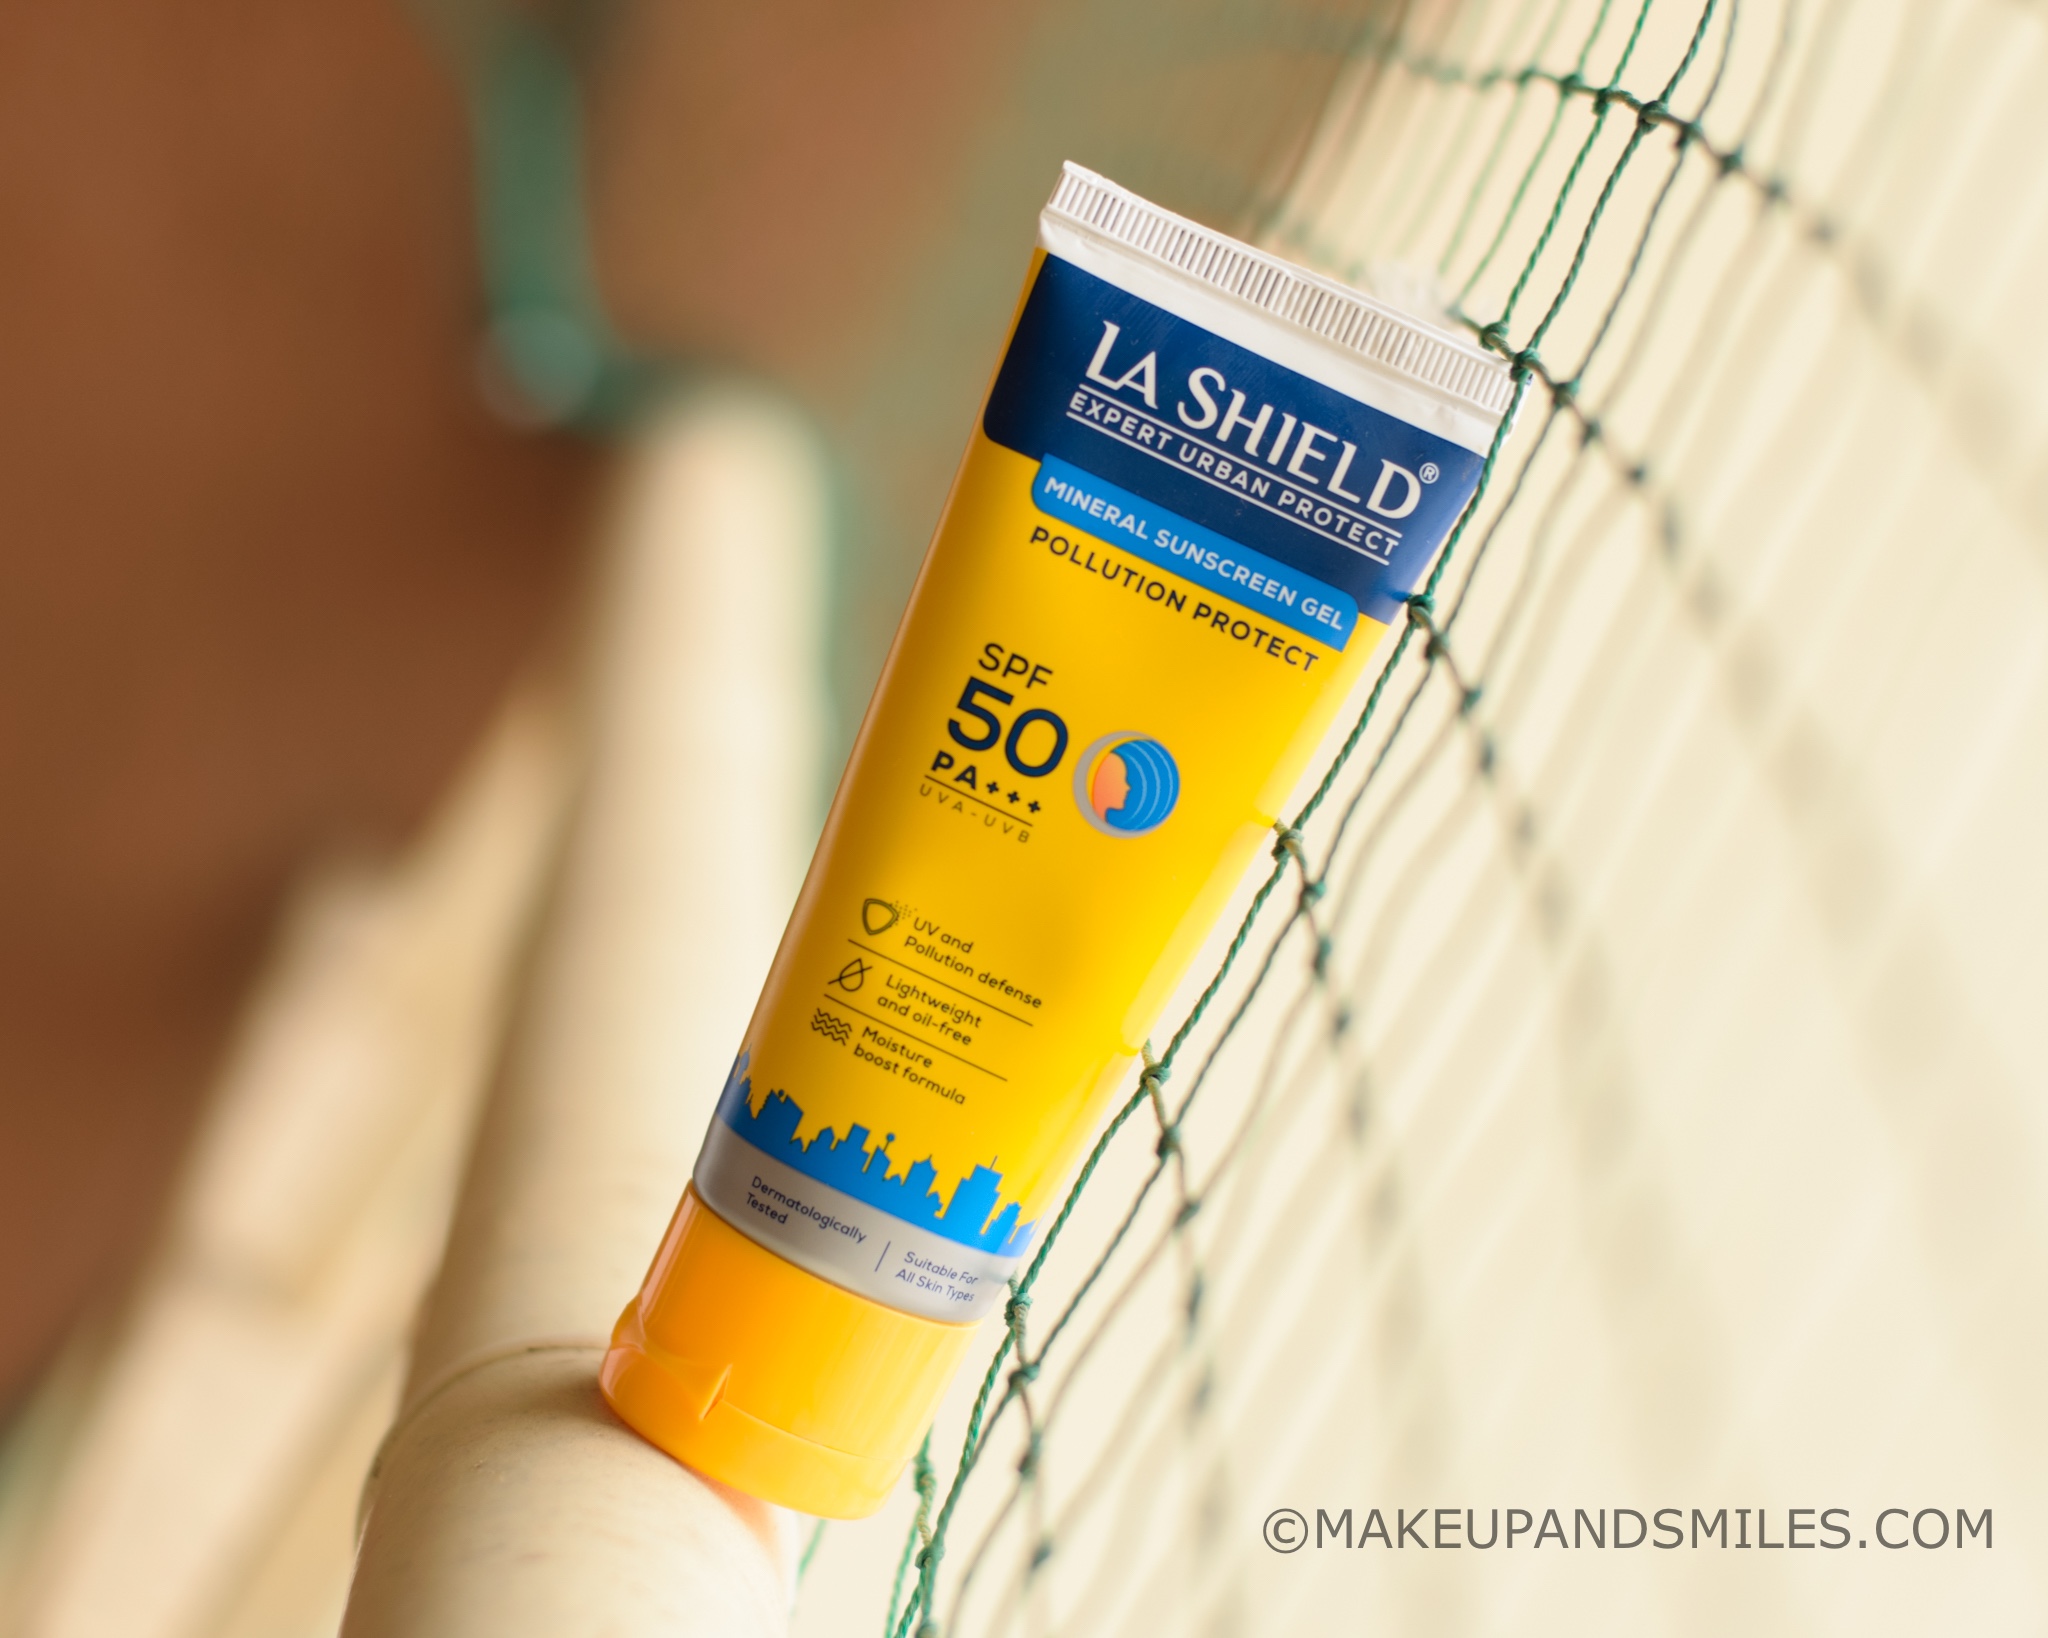 La Shield Pollution Protect Mineral Sunscreen Gel SPF 50 | Review ...
